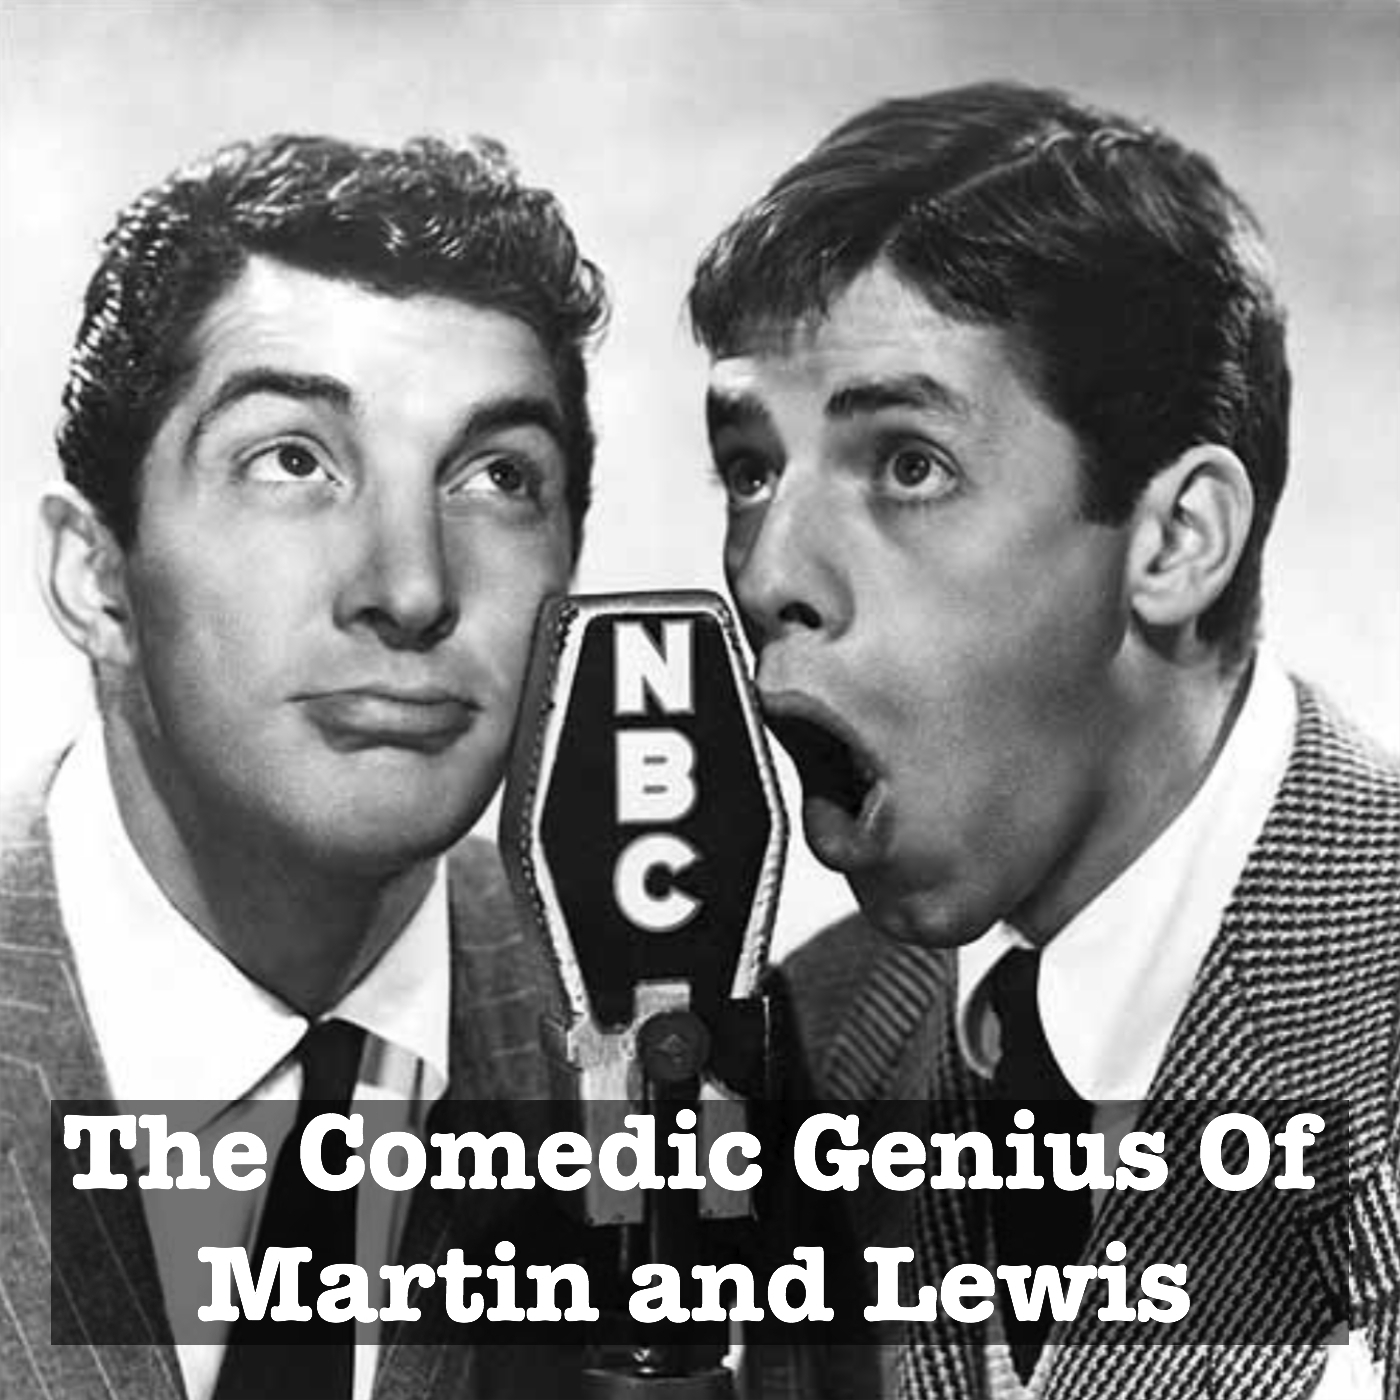 The Comedic Genius of Martin and Lewis